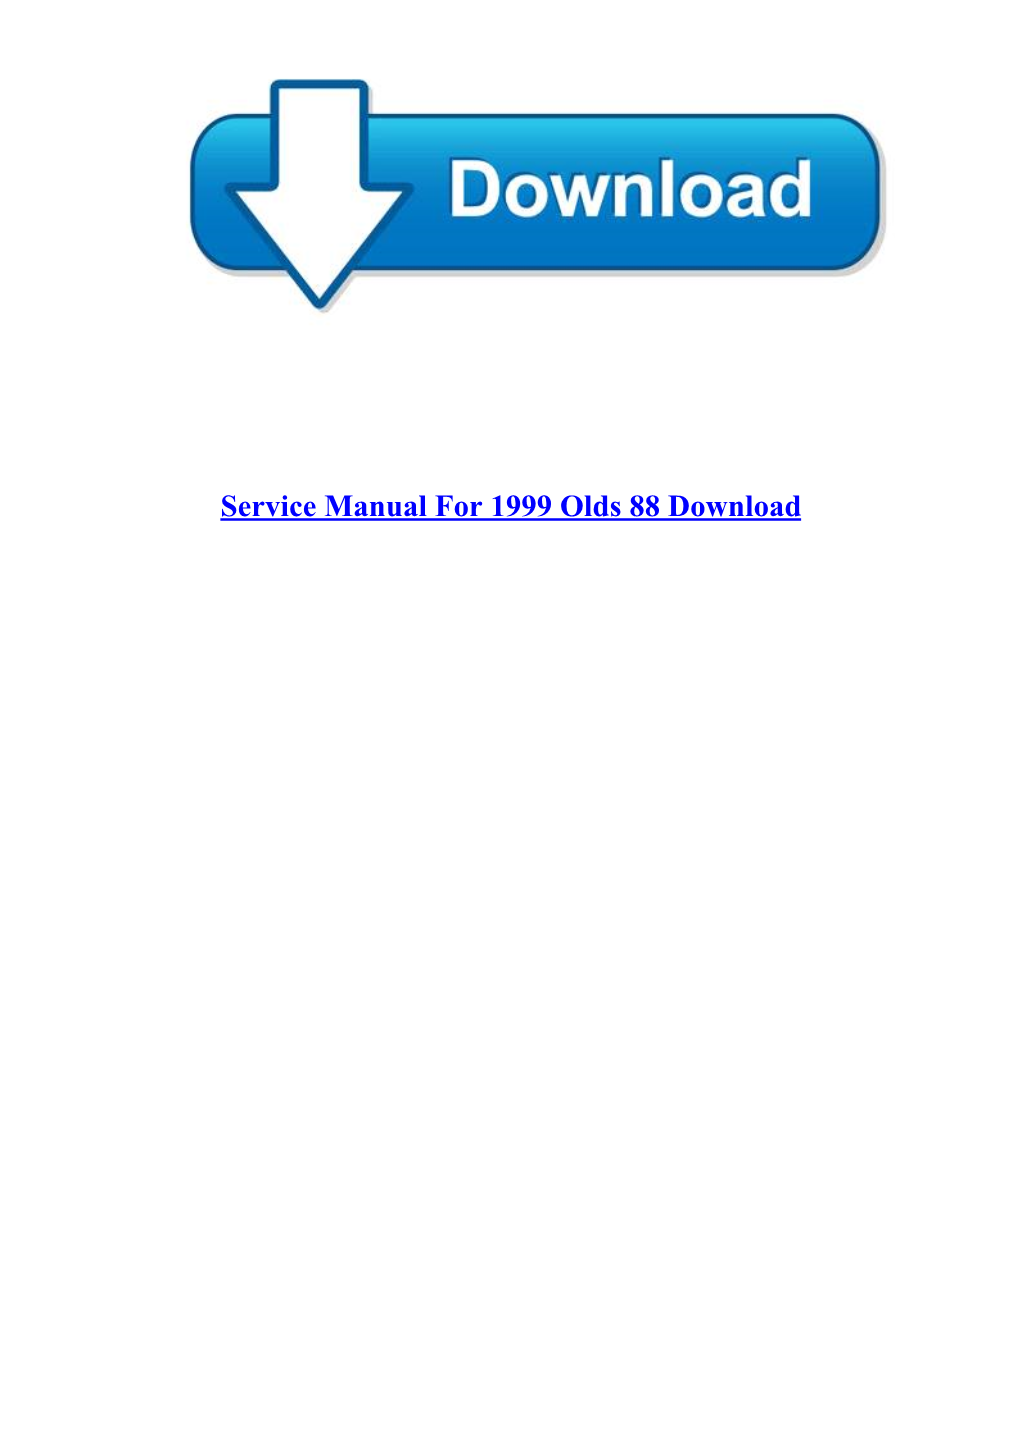 [List Pdf] Service Manual for 1999 Olds 88